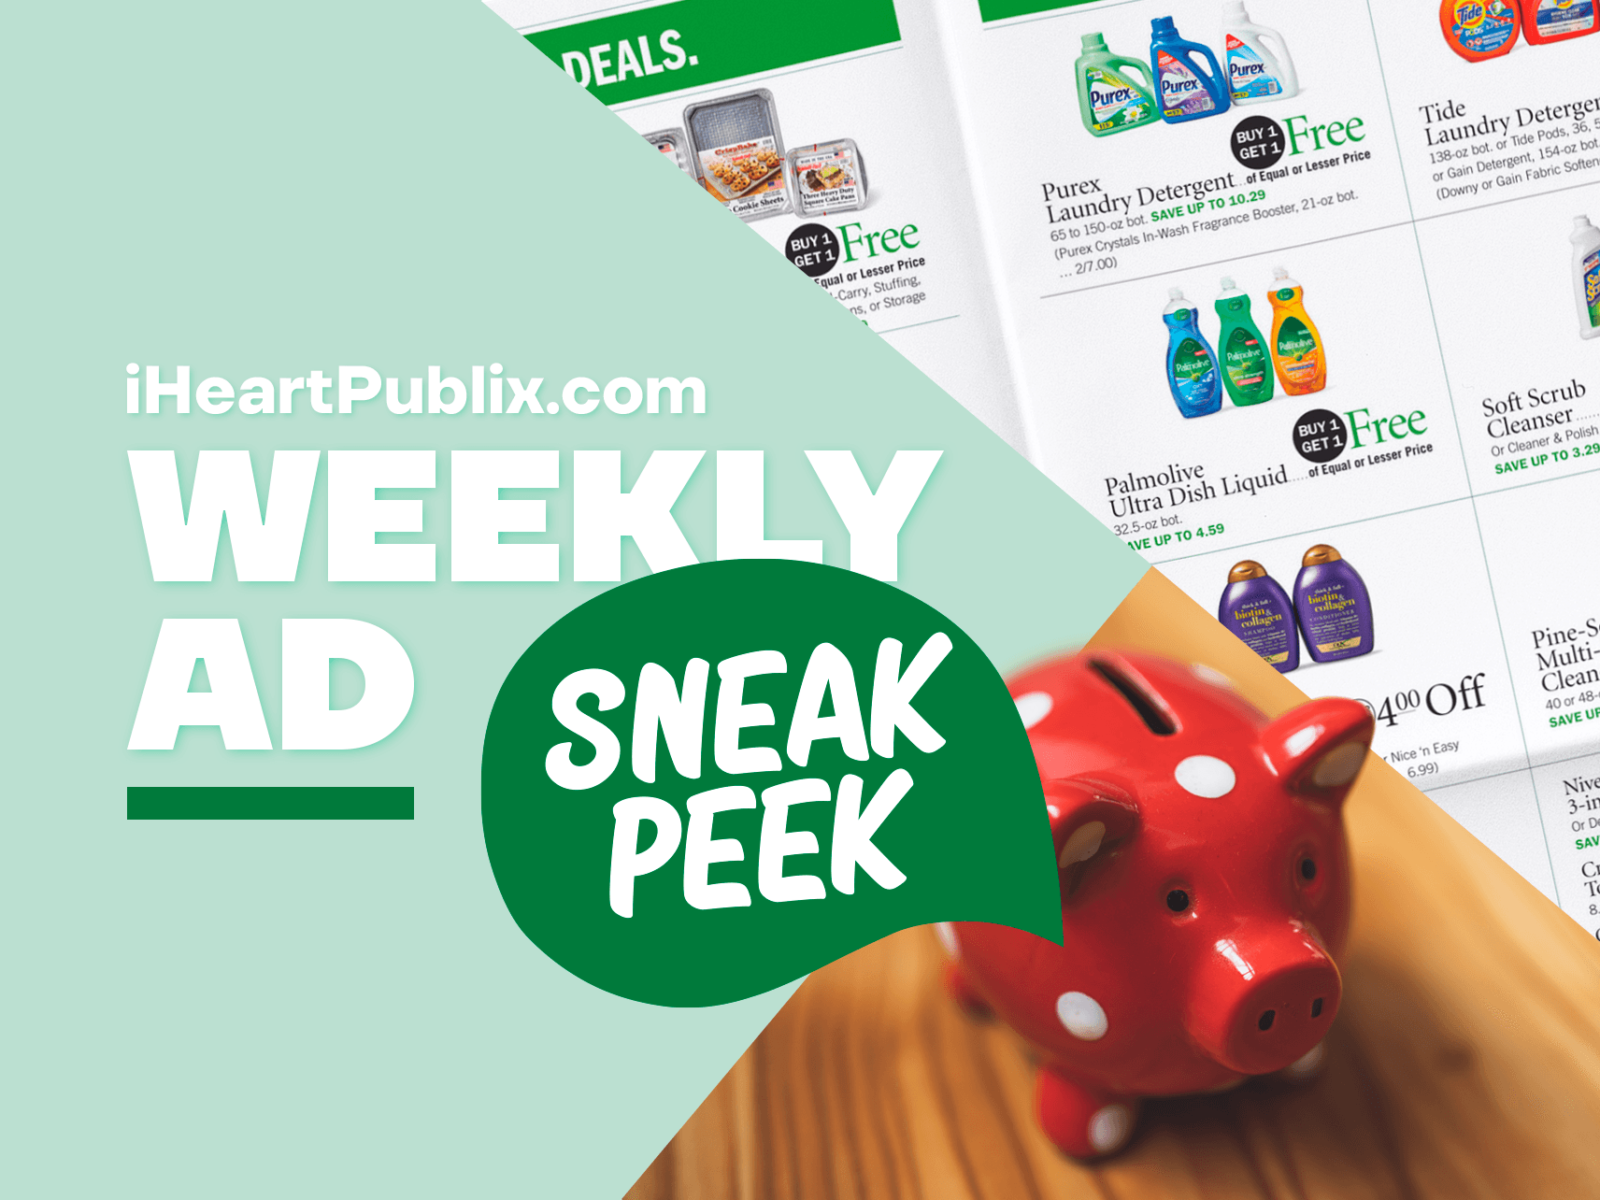 Publix Ad & Coupons Week Of 2/22 to 2/28 (2/21 to 2/27 For Some)